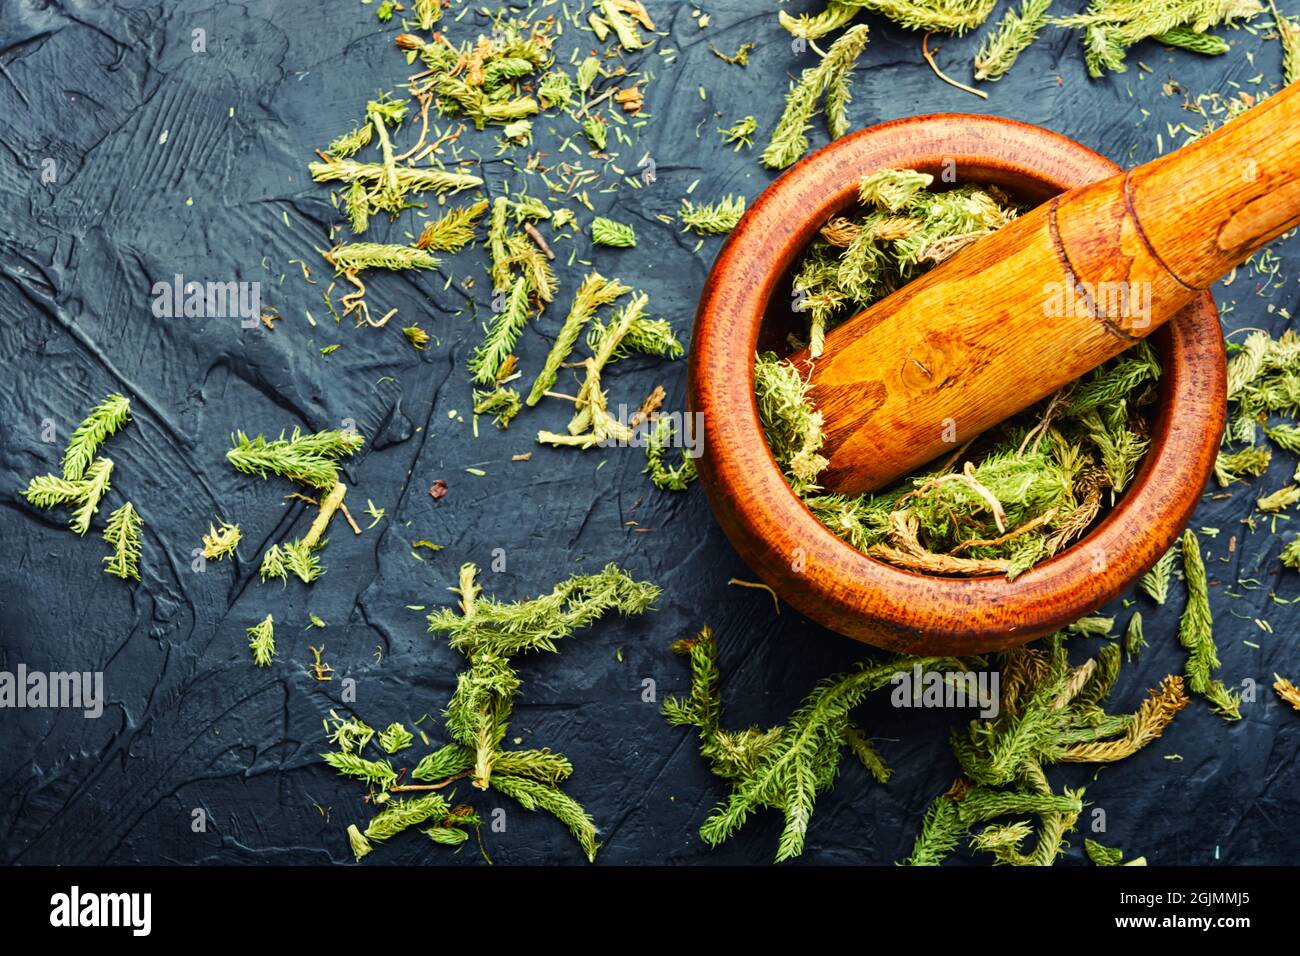 Dried healing plants in a mortar and pestle.Lycopodium in herbal medicine Stock Photo